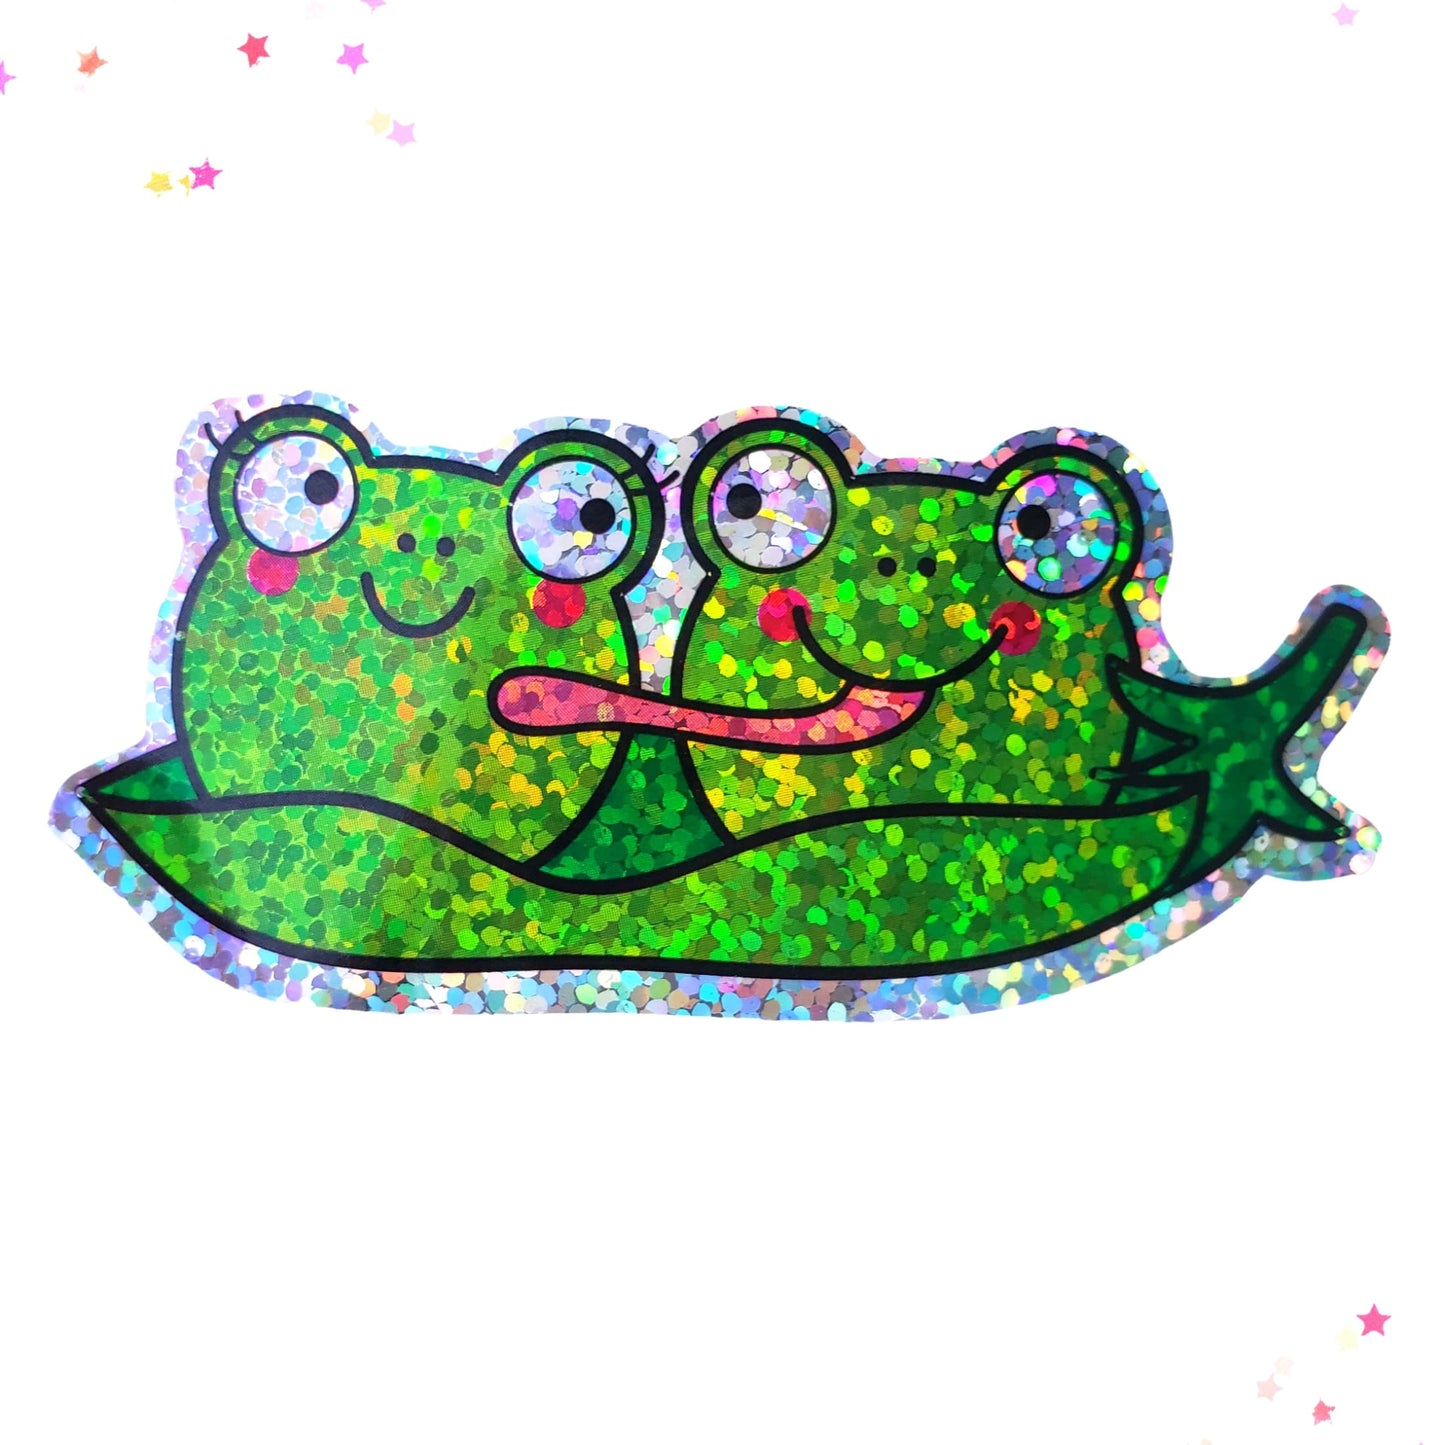 Premium Sticker - Sparkly Holographic Glitter Two Green Frogs from Confetti Kitty, Only 2.0